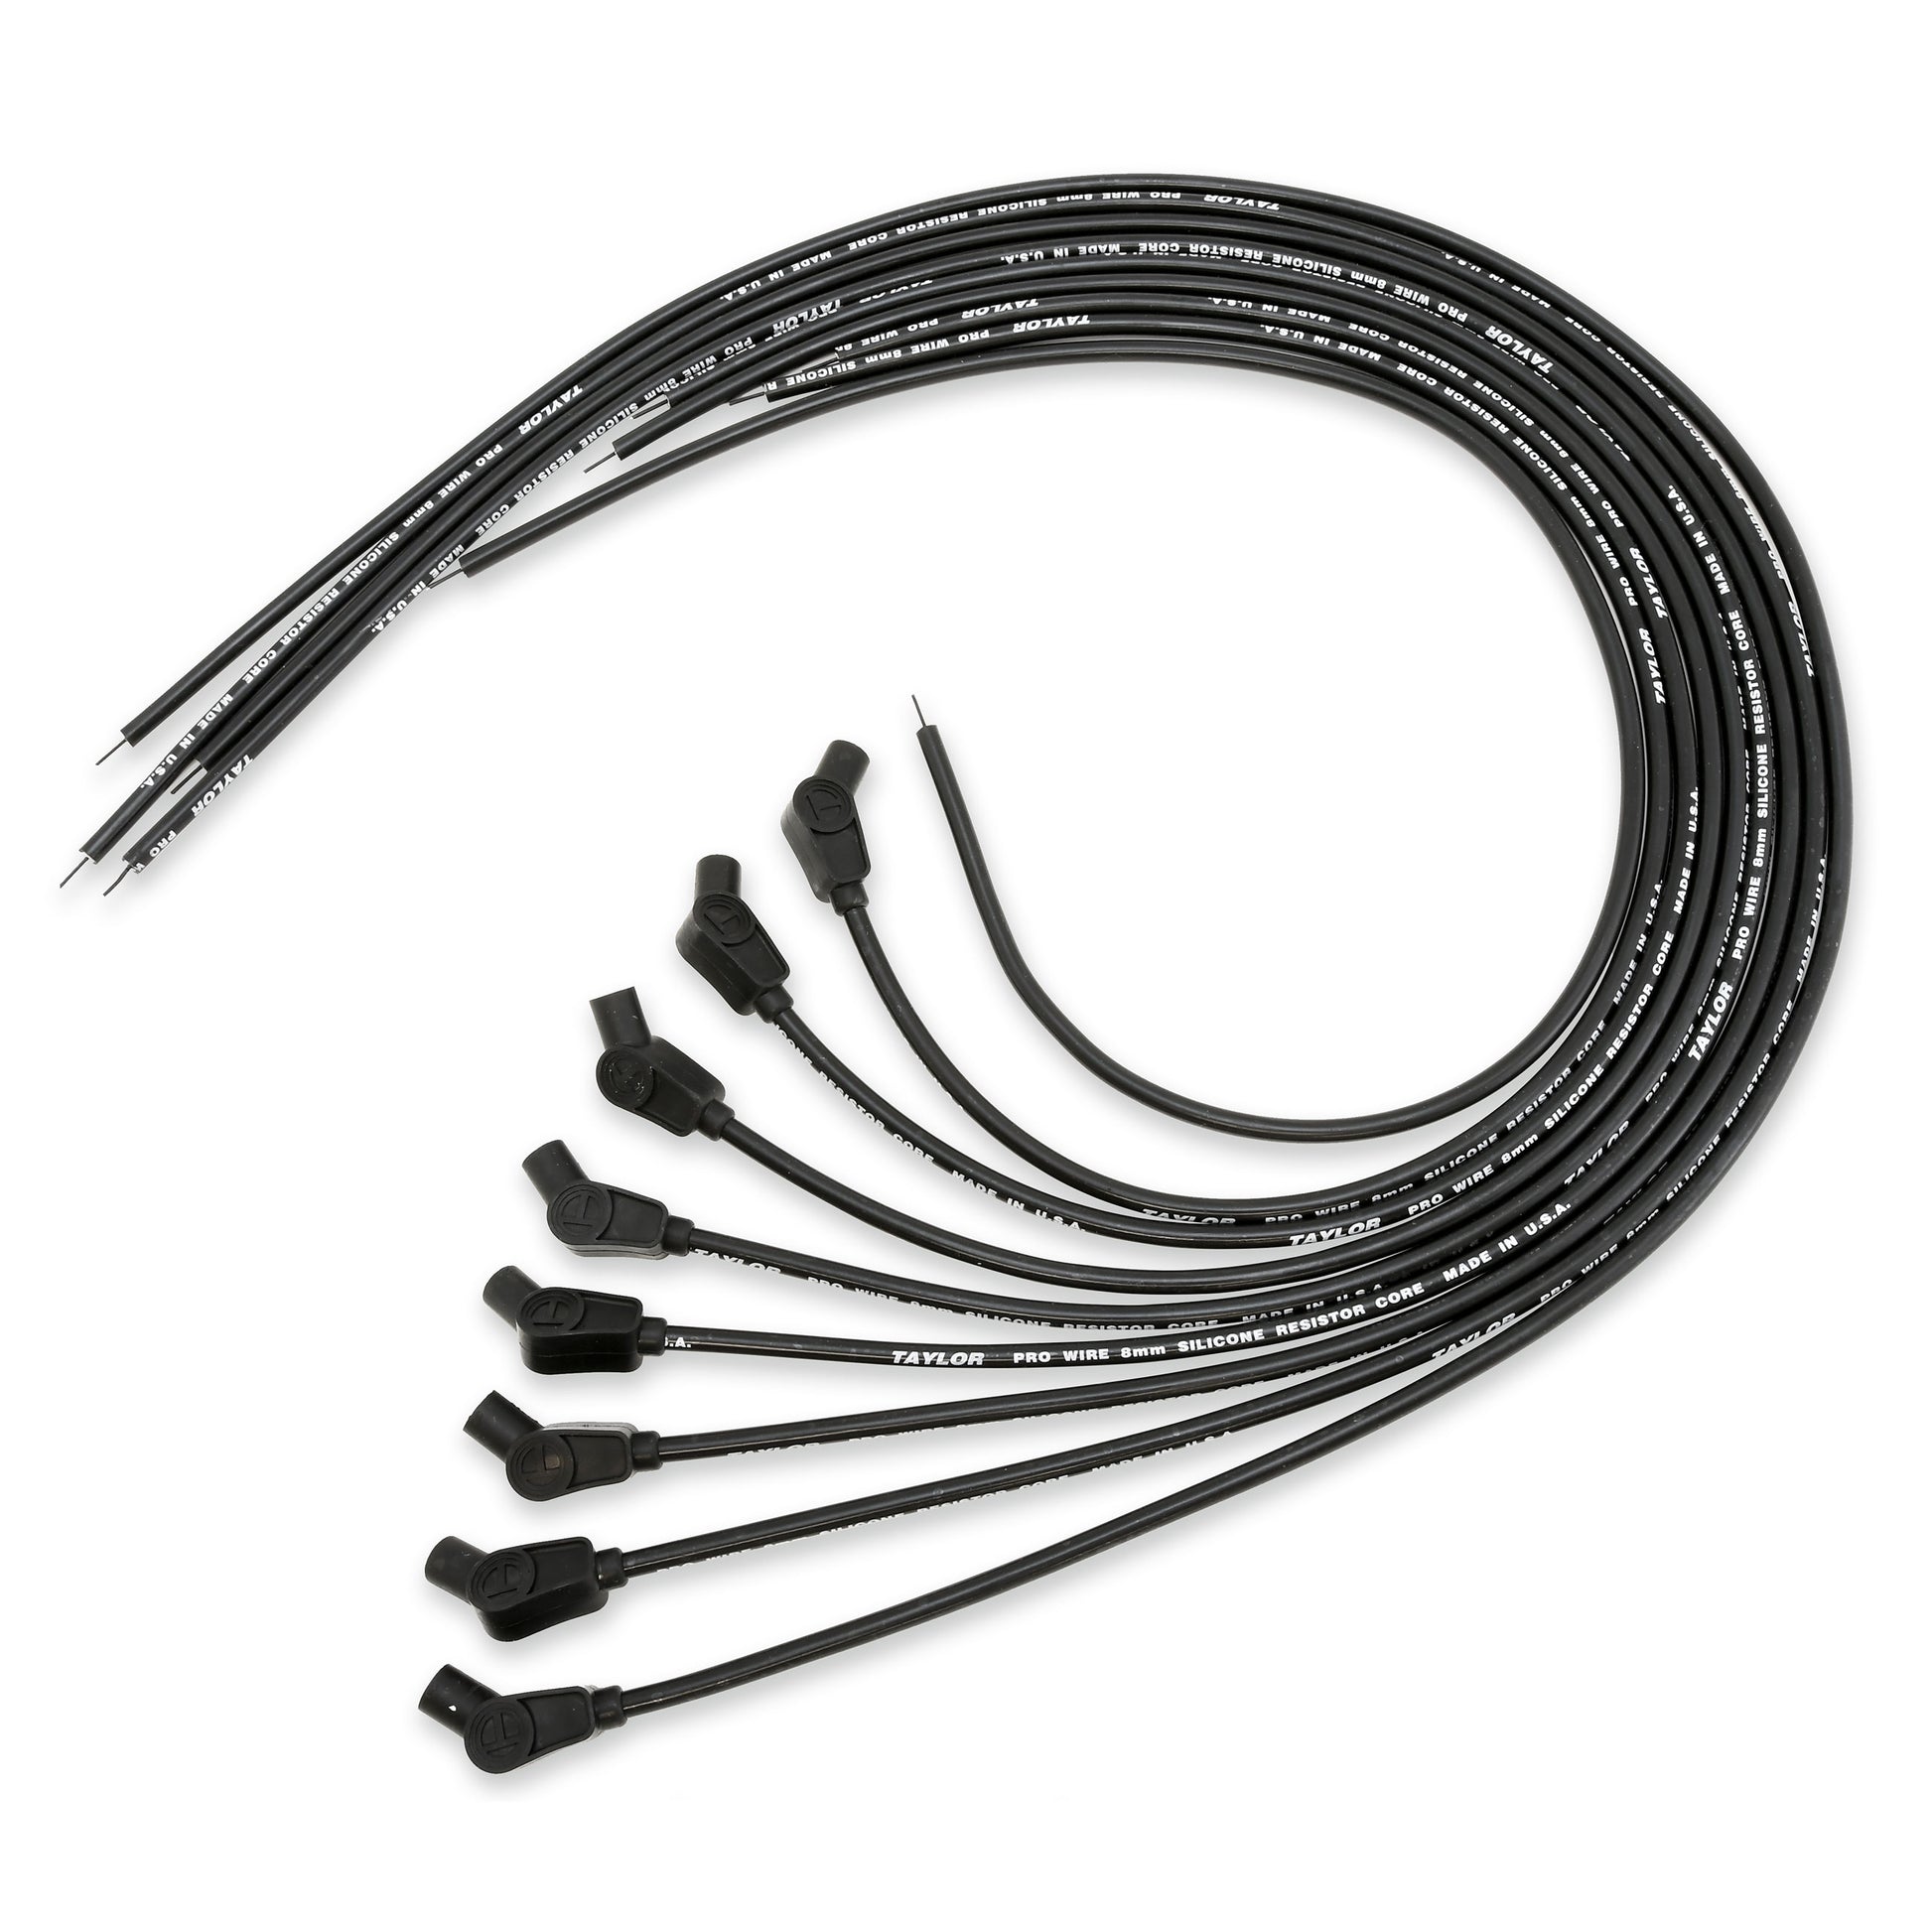 Taylor Cable 70053 8mm Pro RC Ignition Wires univ 8 cyl 135 black